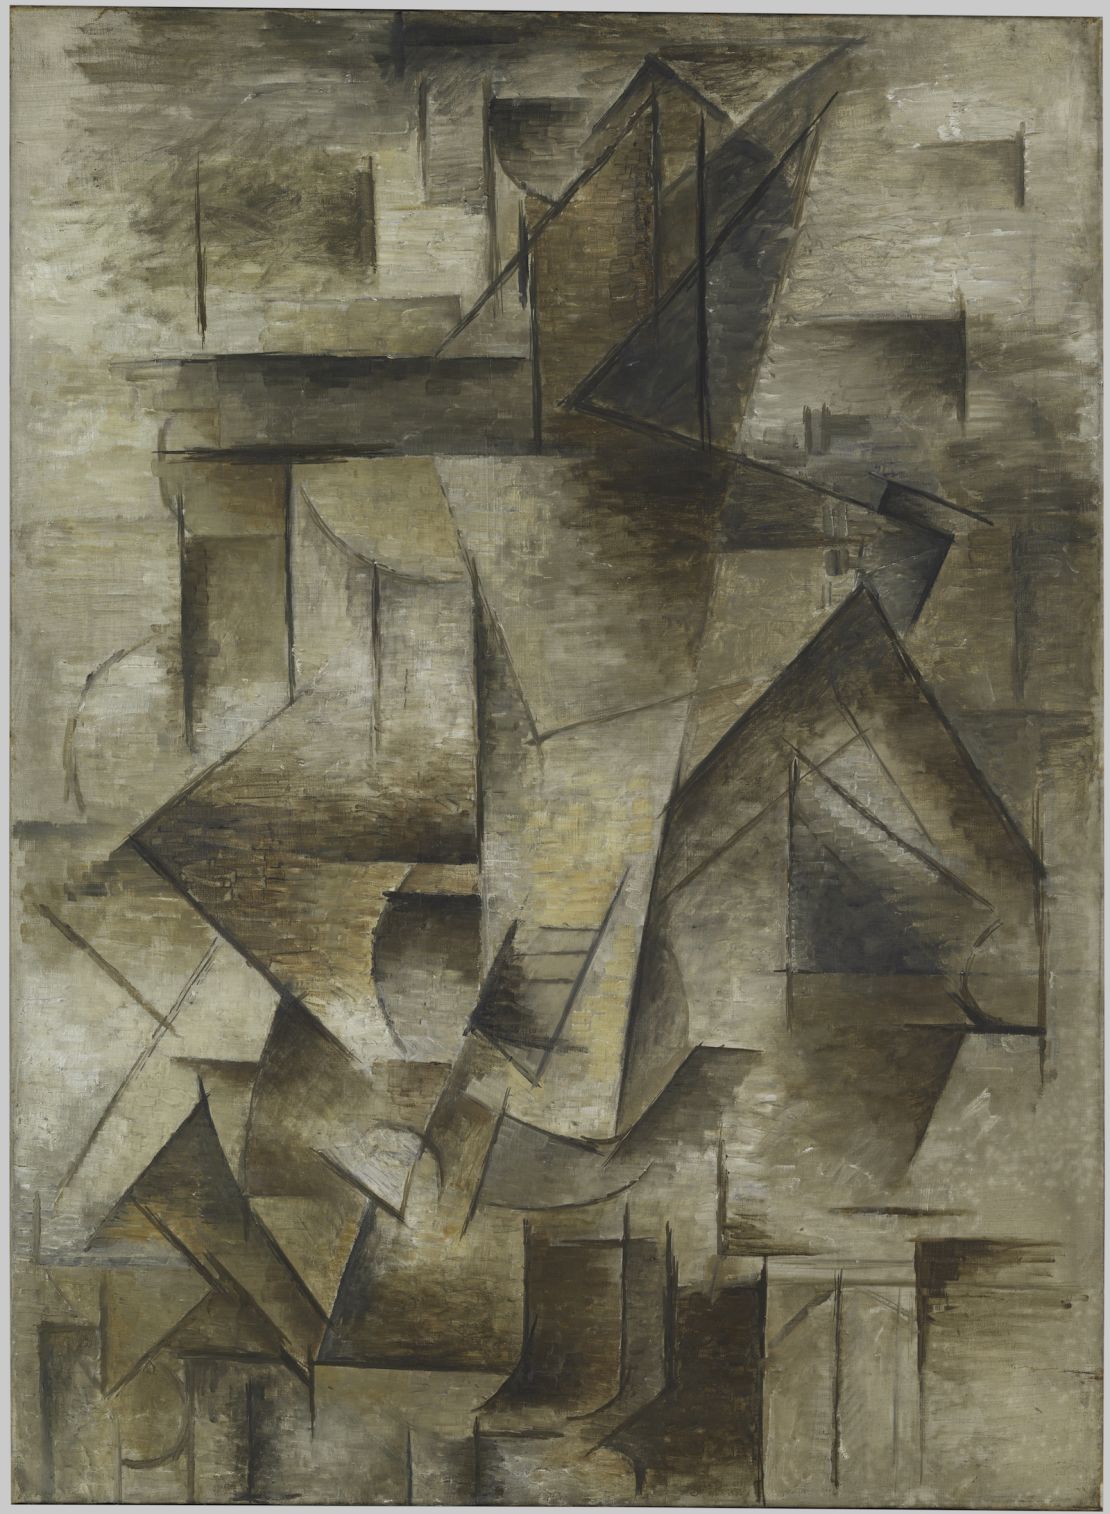 Pablo Picasso's "Le Guitariste," one of the first batch of artworks on loan from the Centre Pompidou's Paris home.